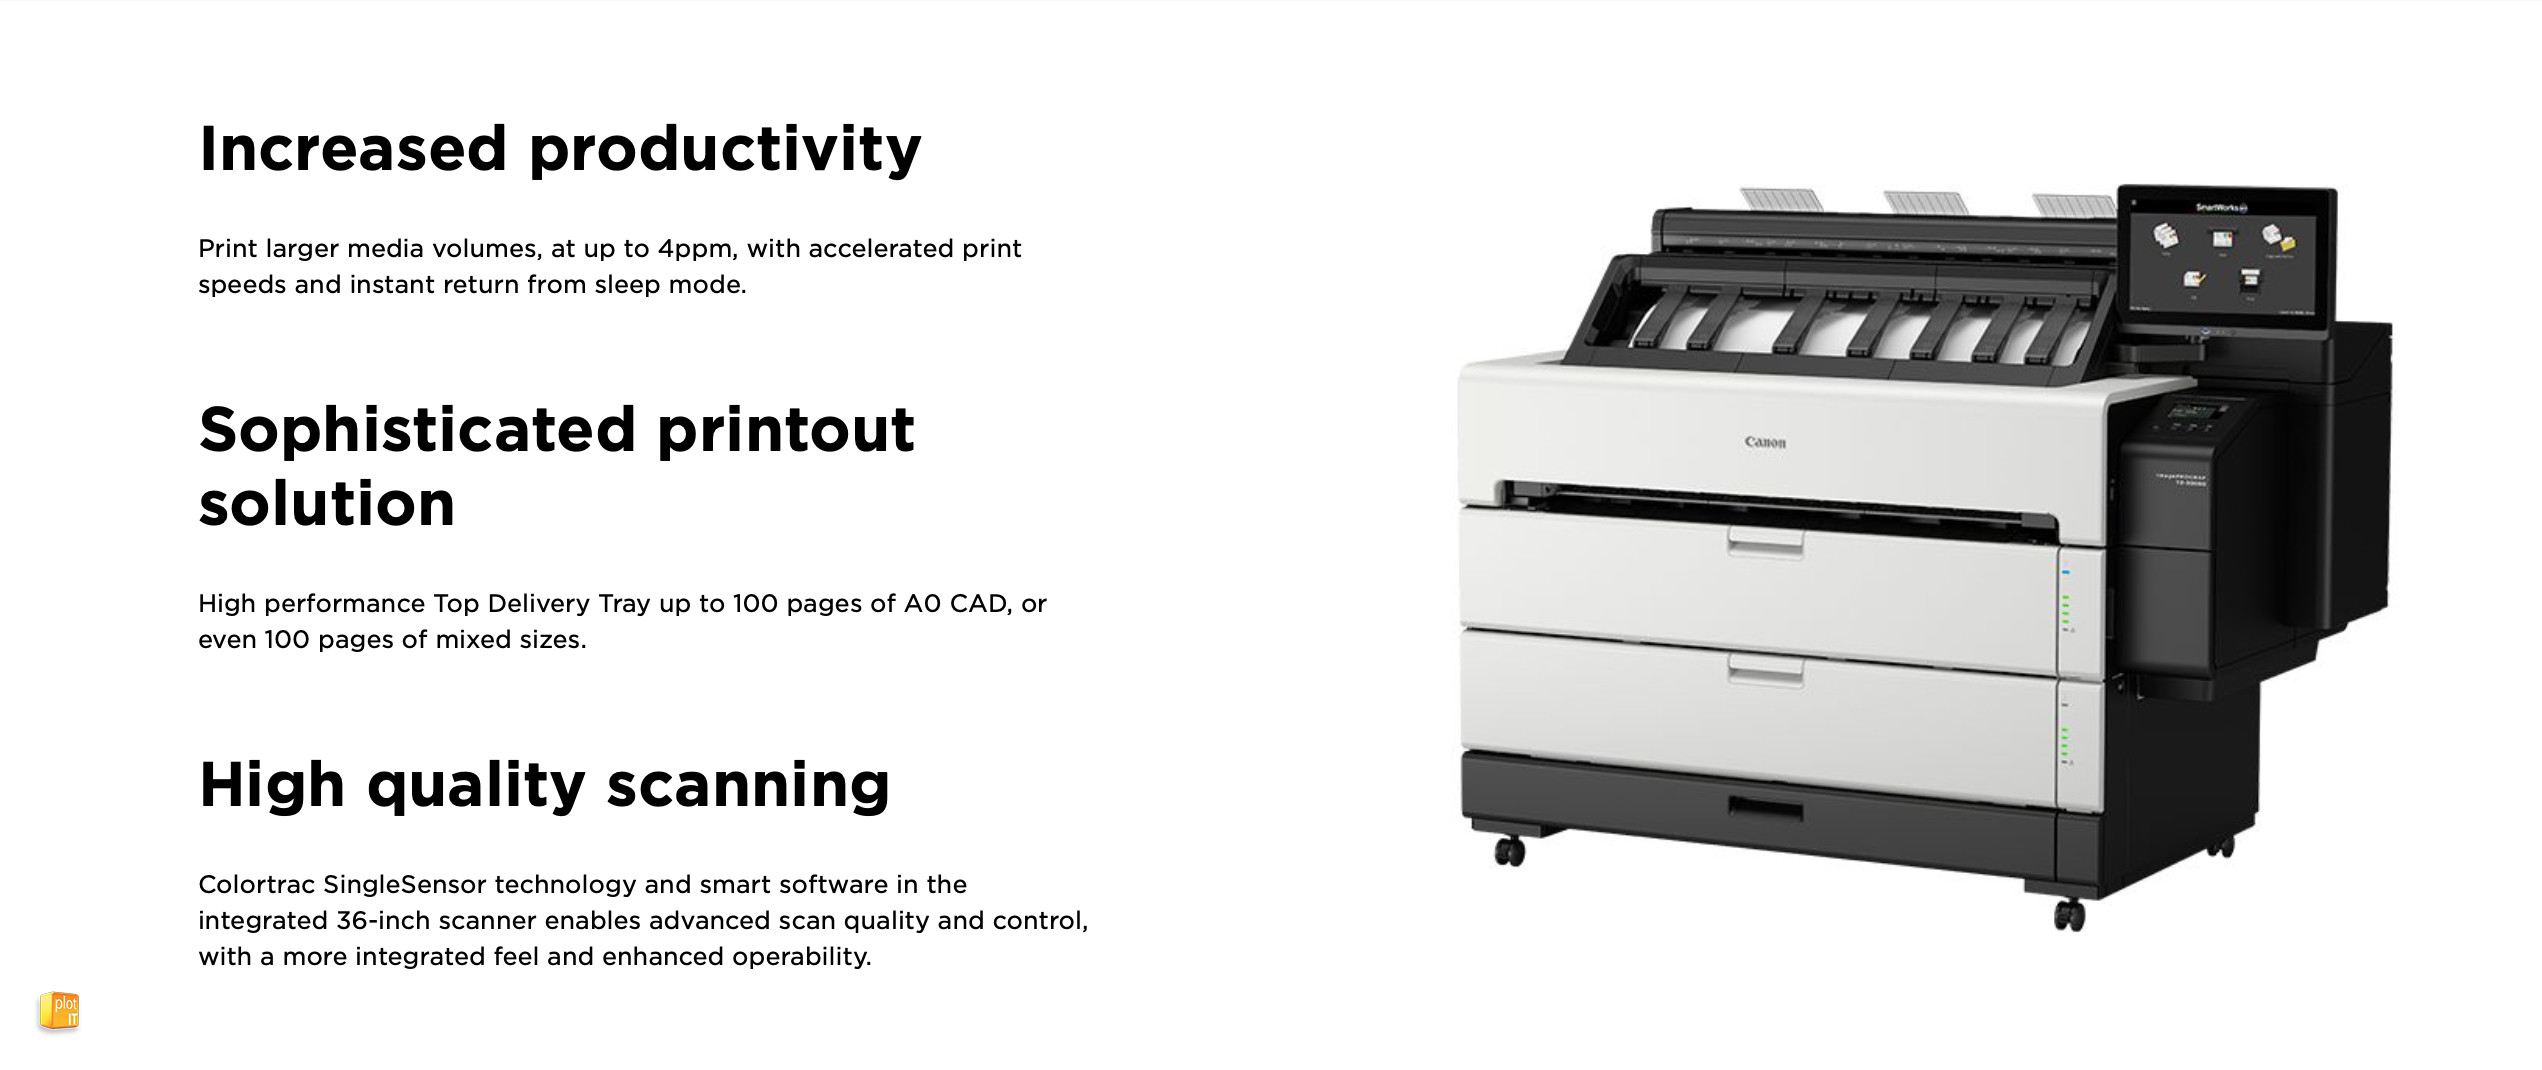 CANON TZ-30000 MFP Z36 IMAGE WITH KEY FEATURES